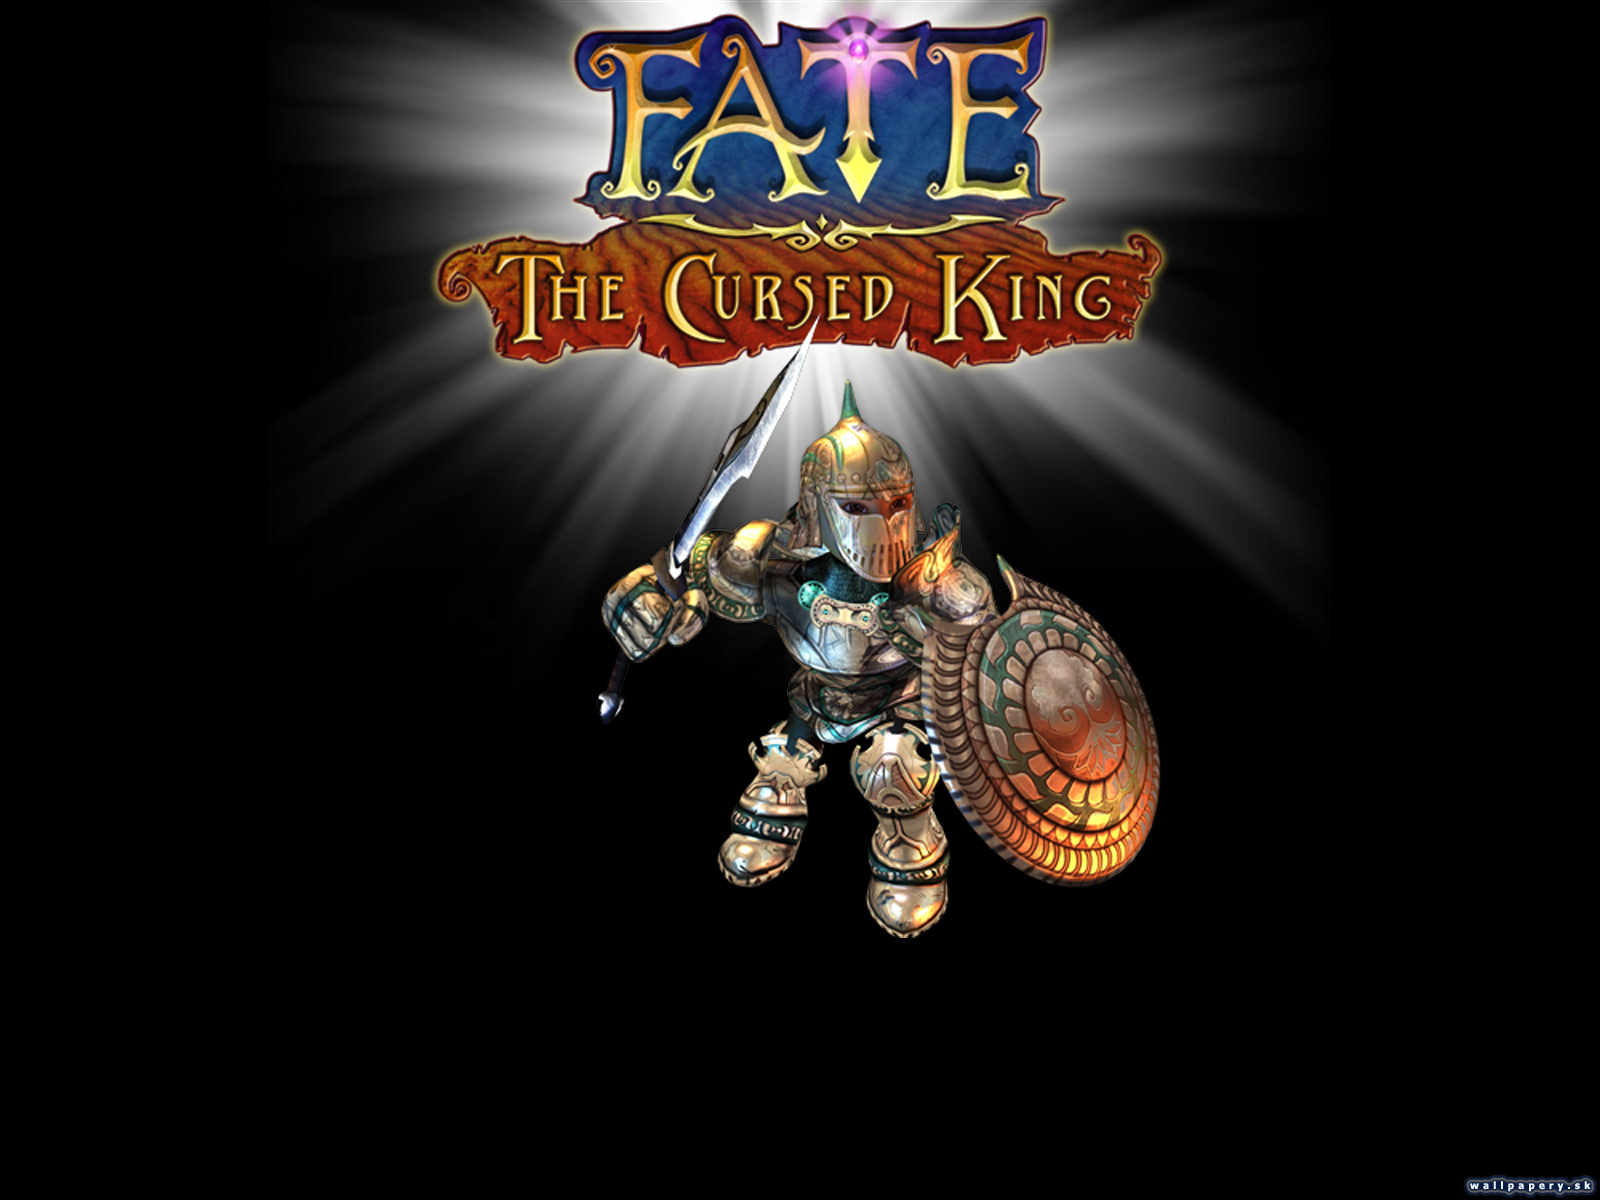 FATE: The Cursed King - wallpaper 2